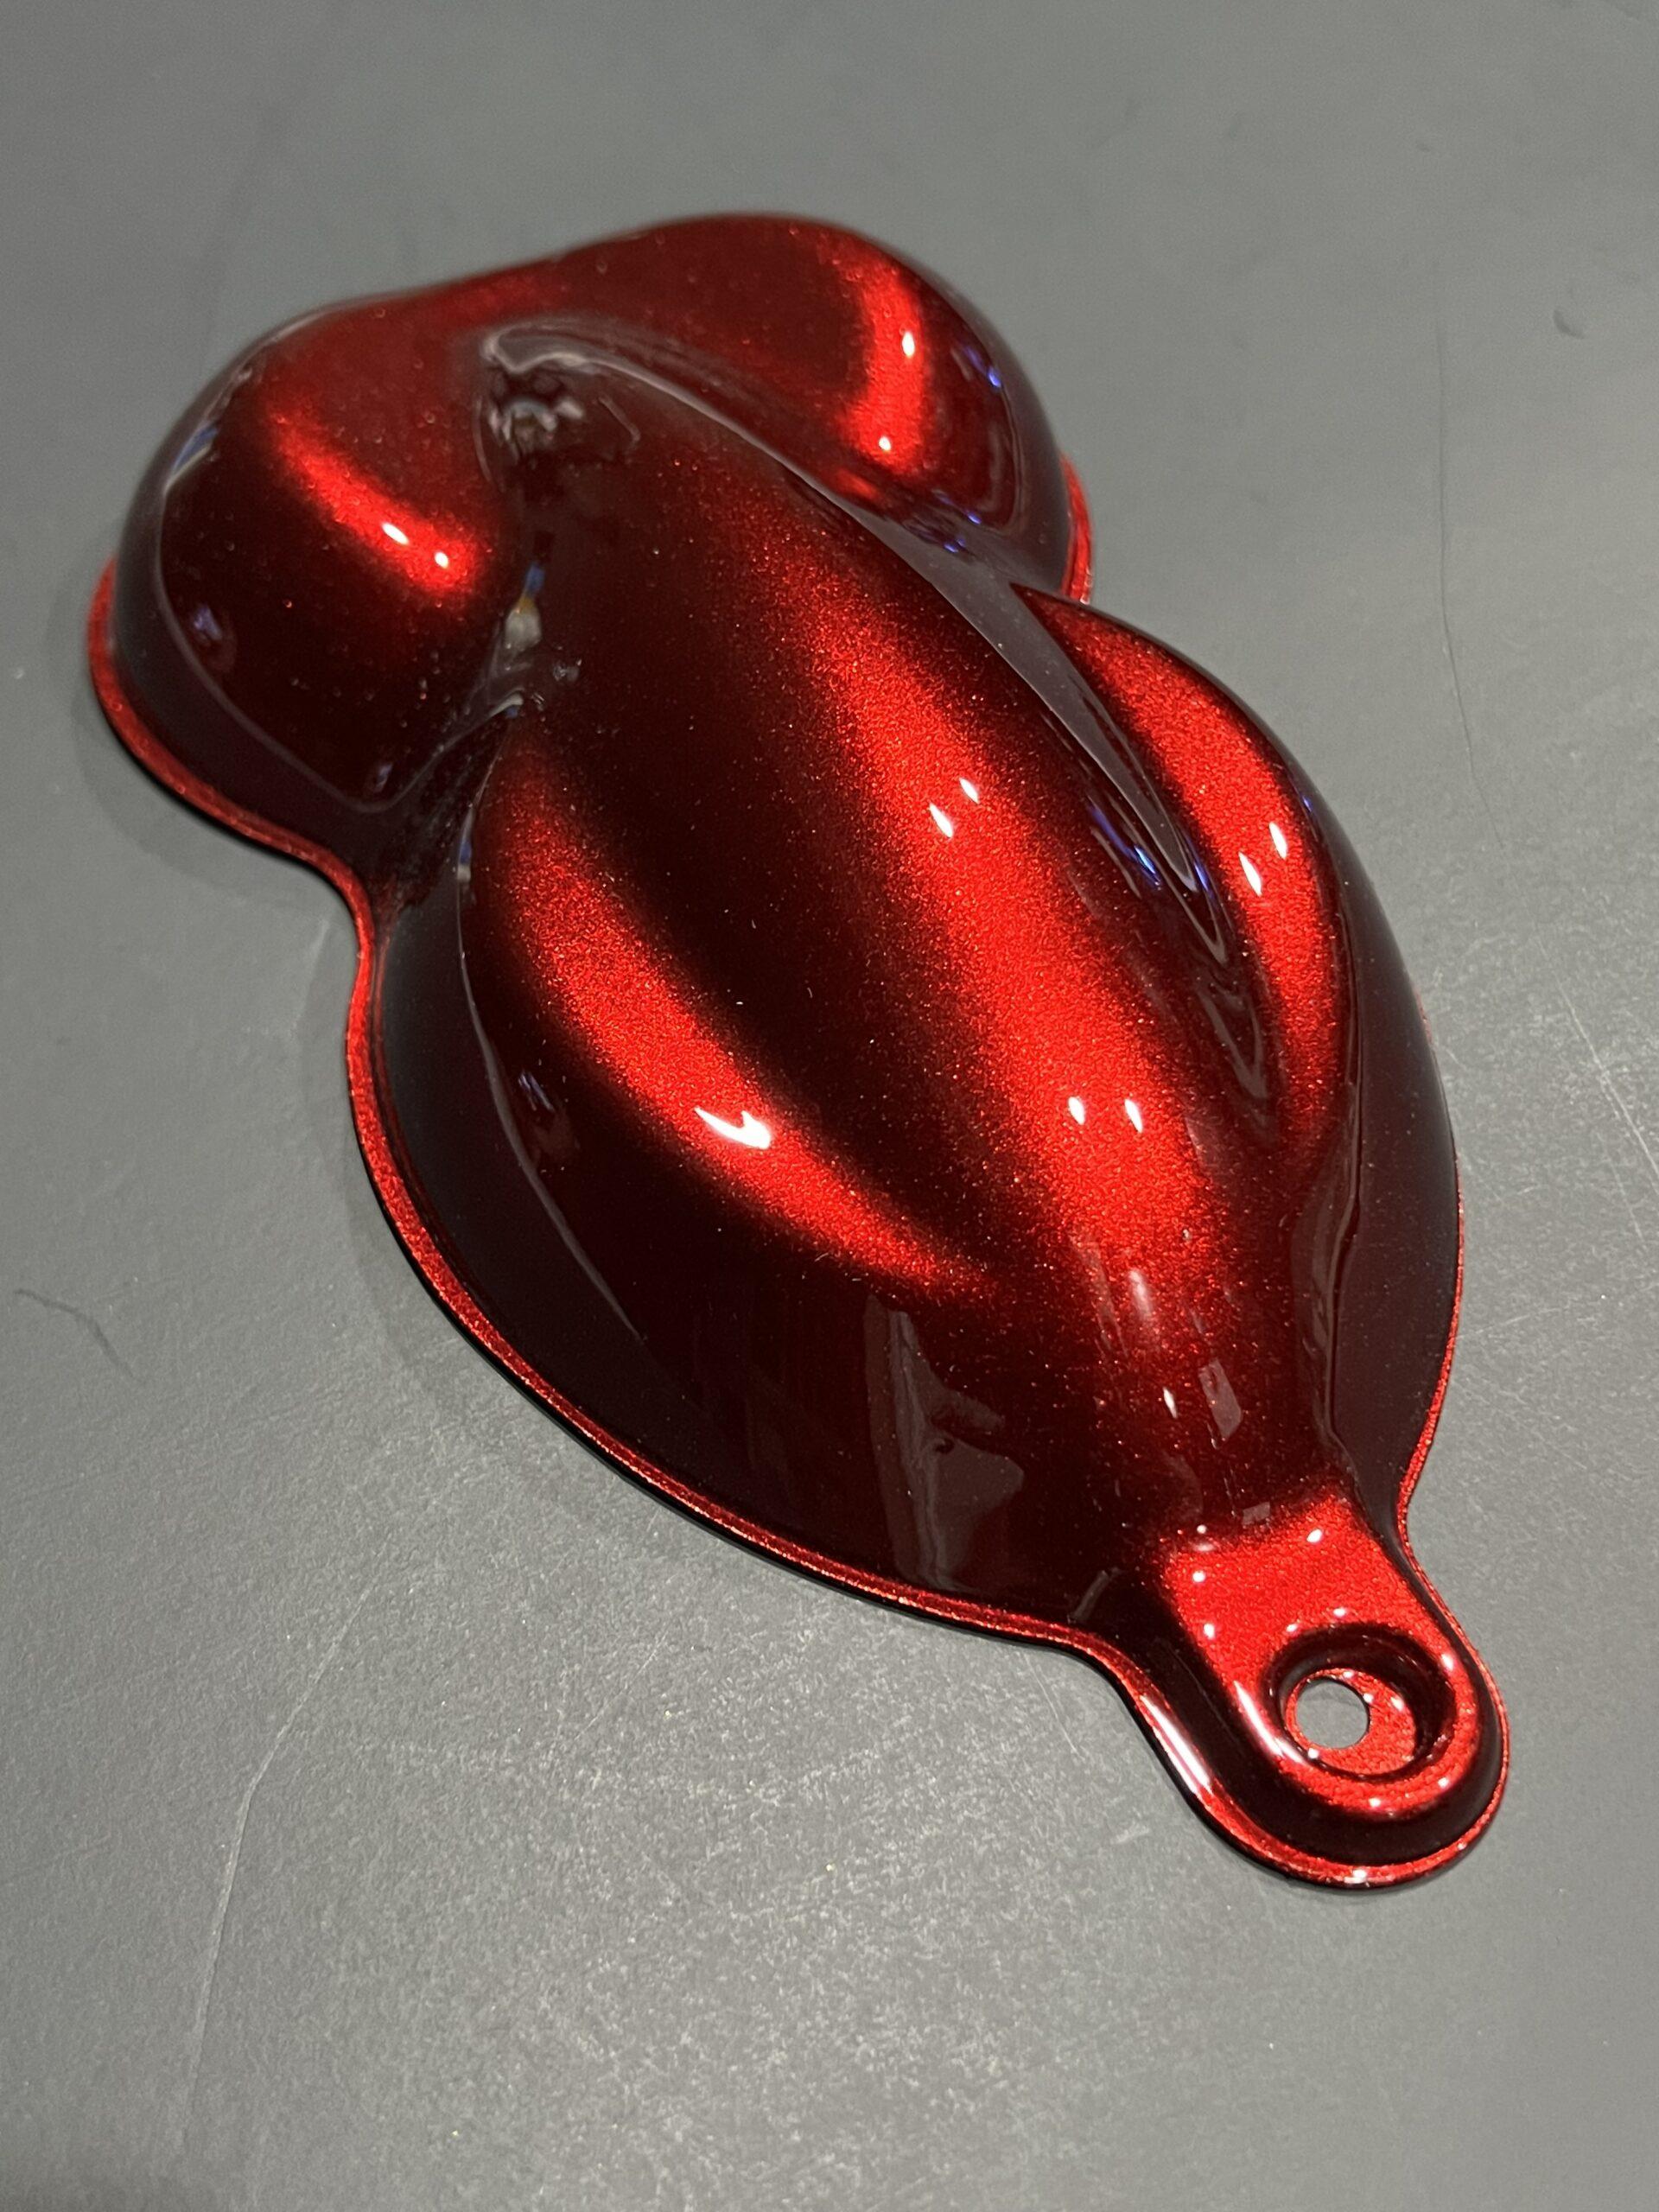 OCM-3301 ETHEREAL RED METALLIC CANDY | Orion Automotive Finishes